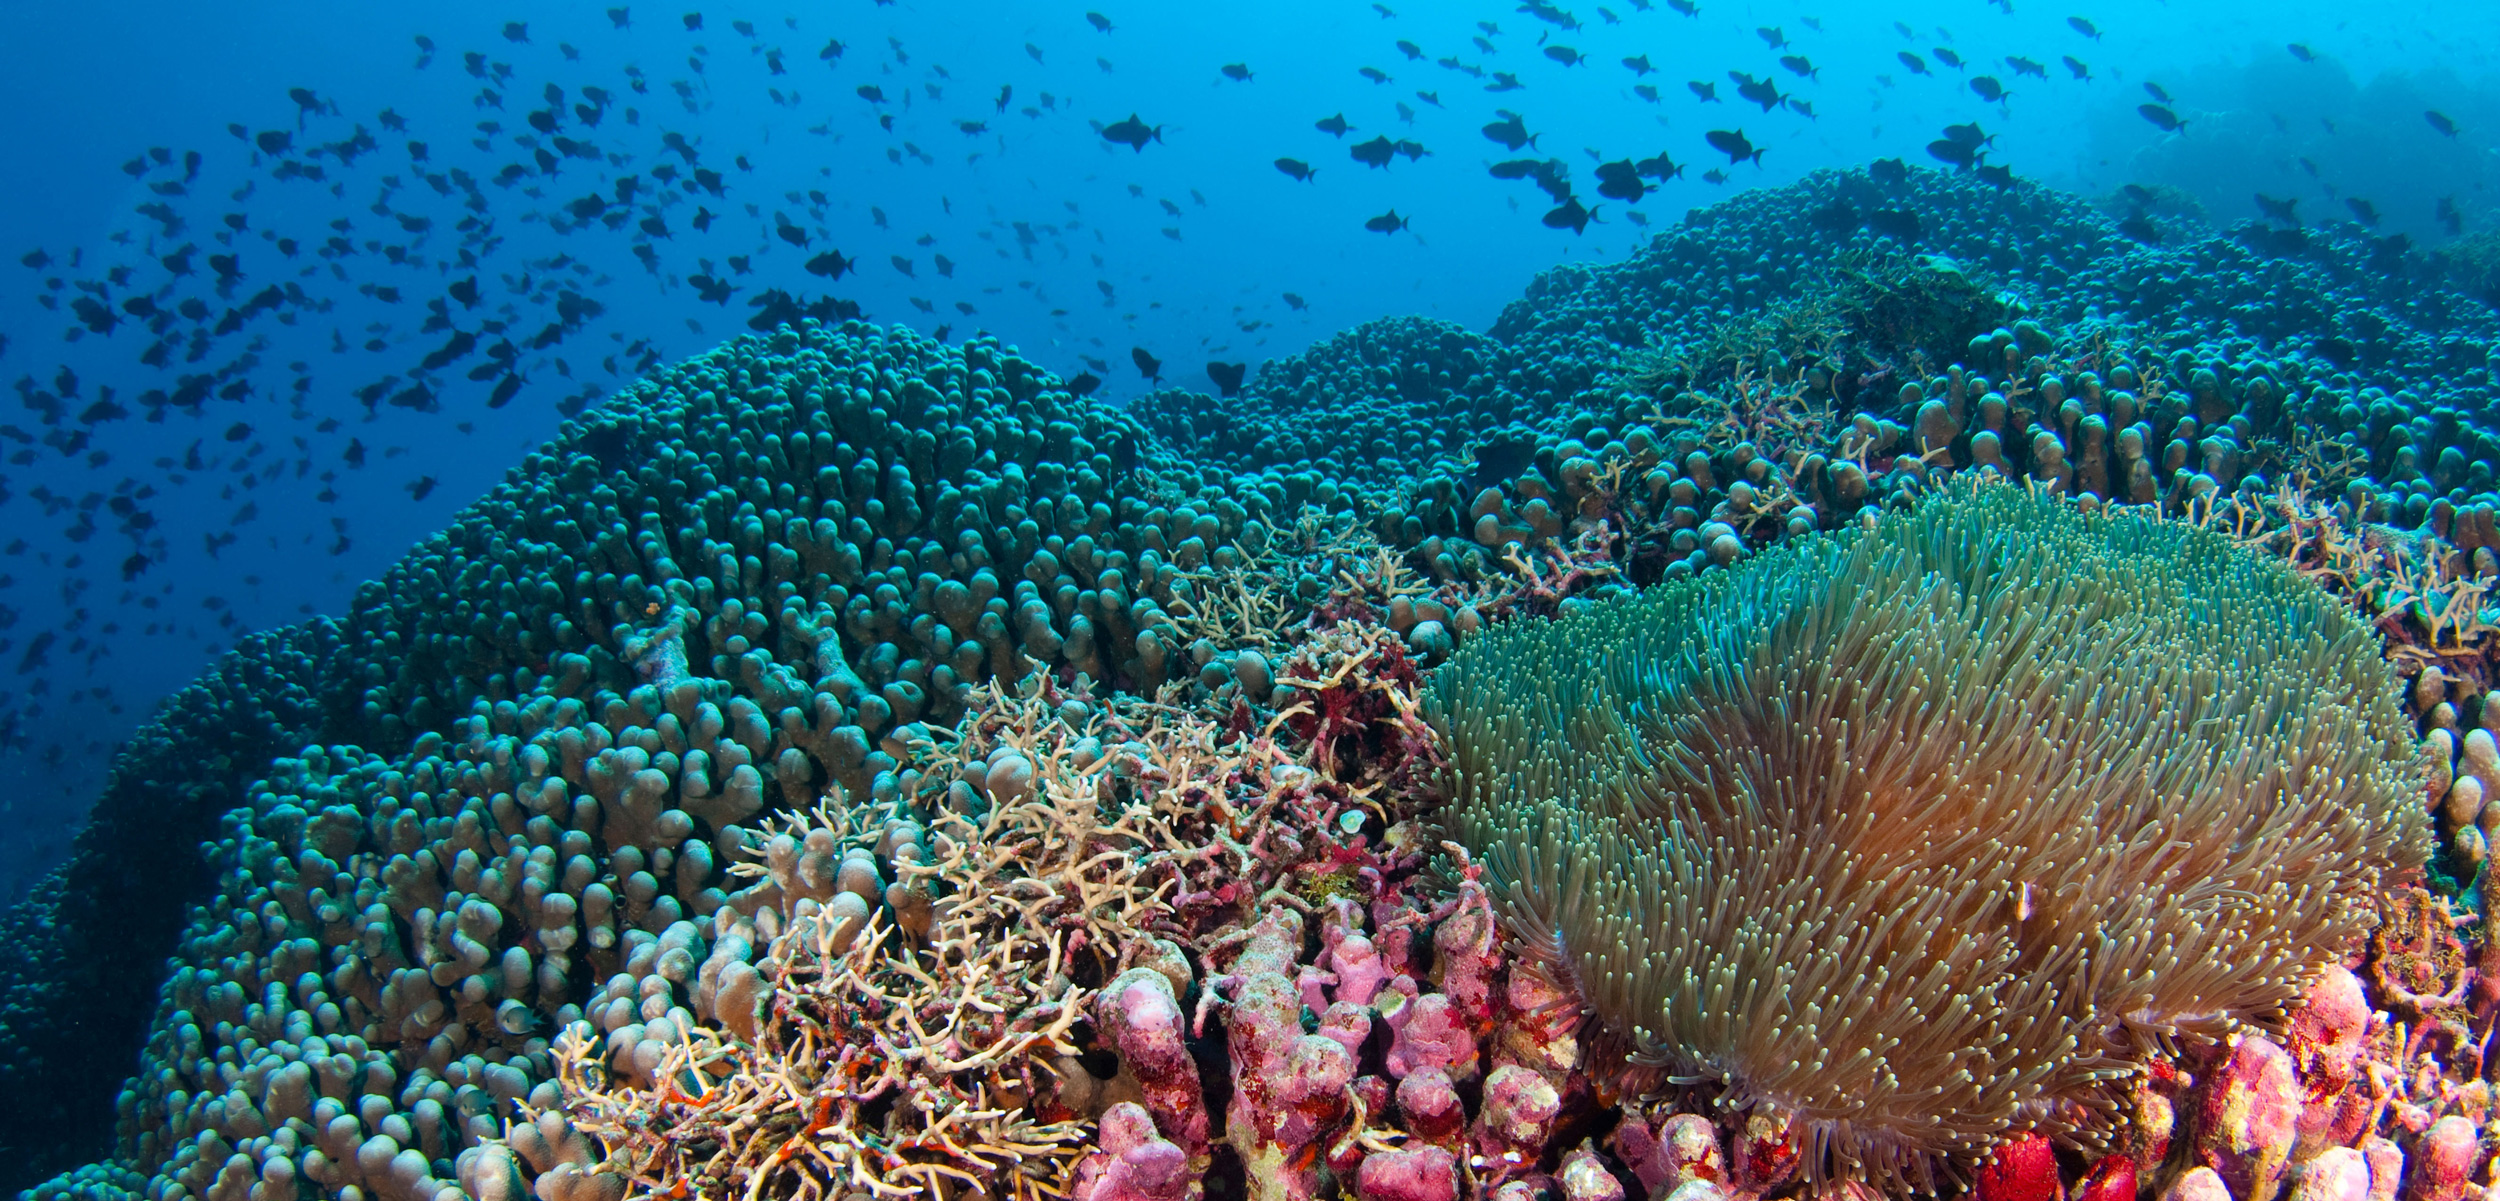 Coral reefs around Indonesia have been damaged by destructive fishing practices—those who care most about them are hoping local efforts can help restore the reefs to their former glory. Photo by Scubazoo/Alamy Stock Photo